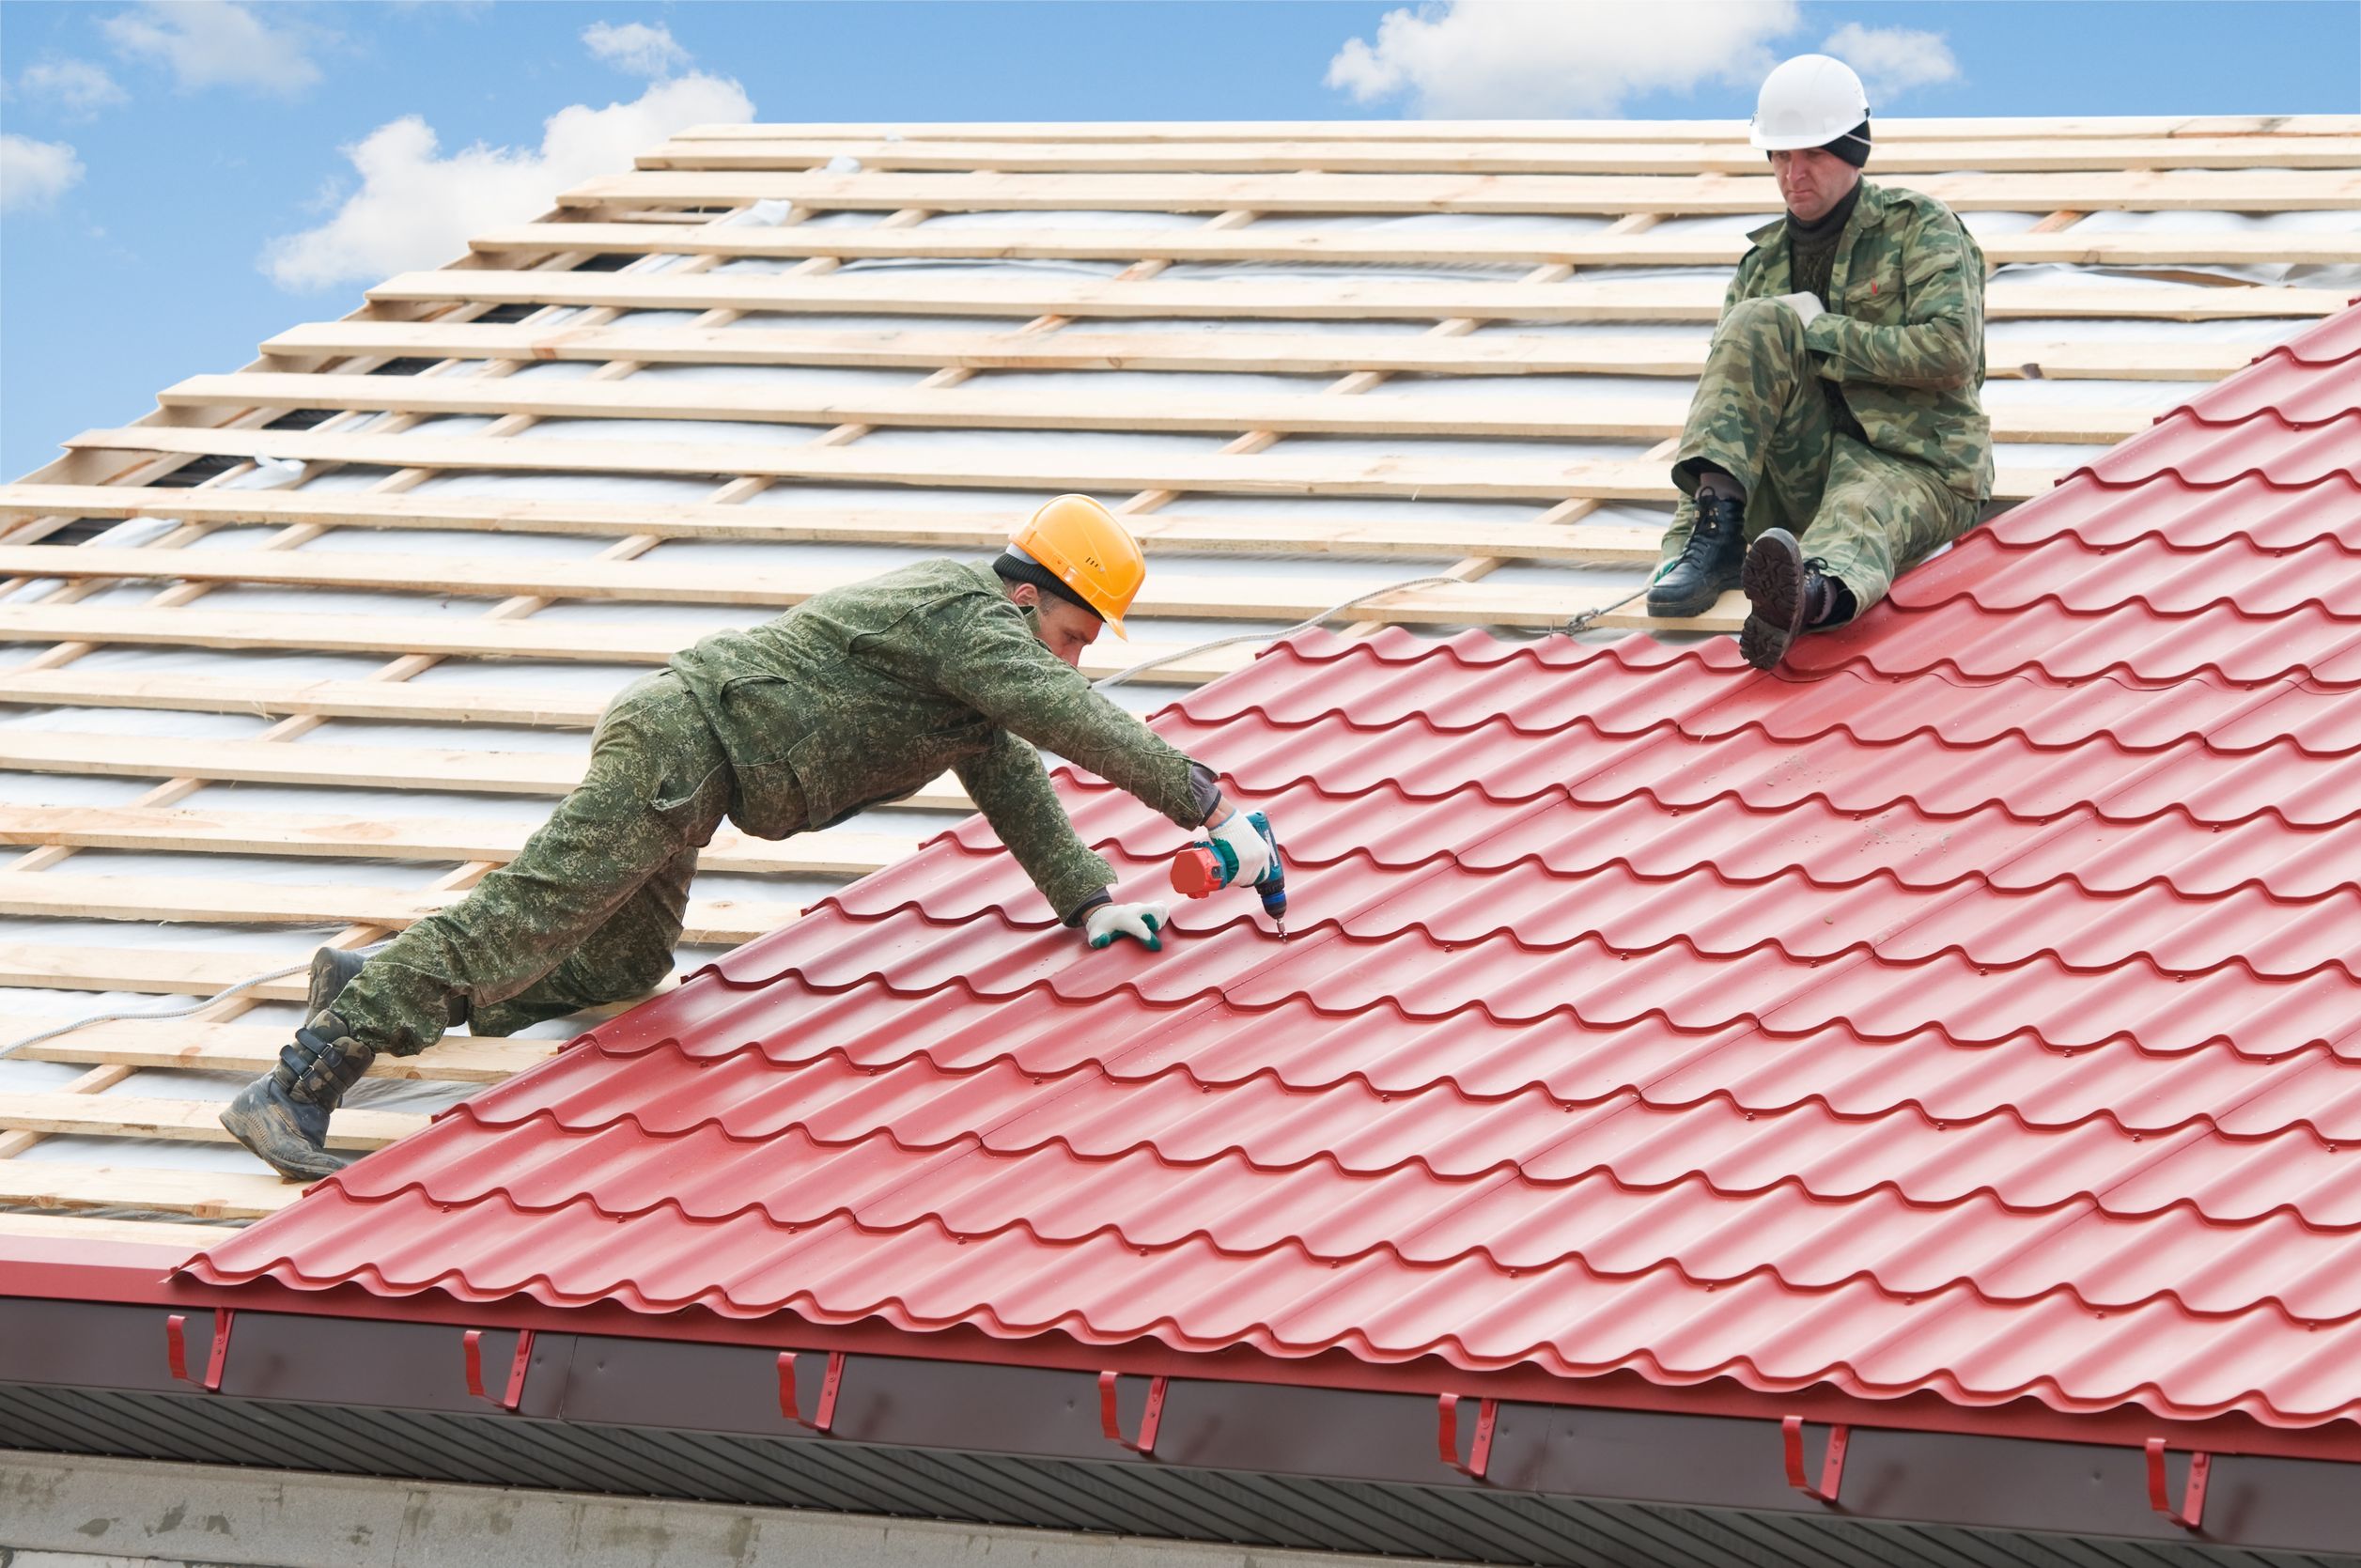 Roof Maintenance: How to Keep Your Roof in Good Shape